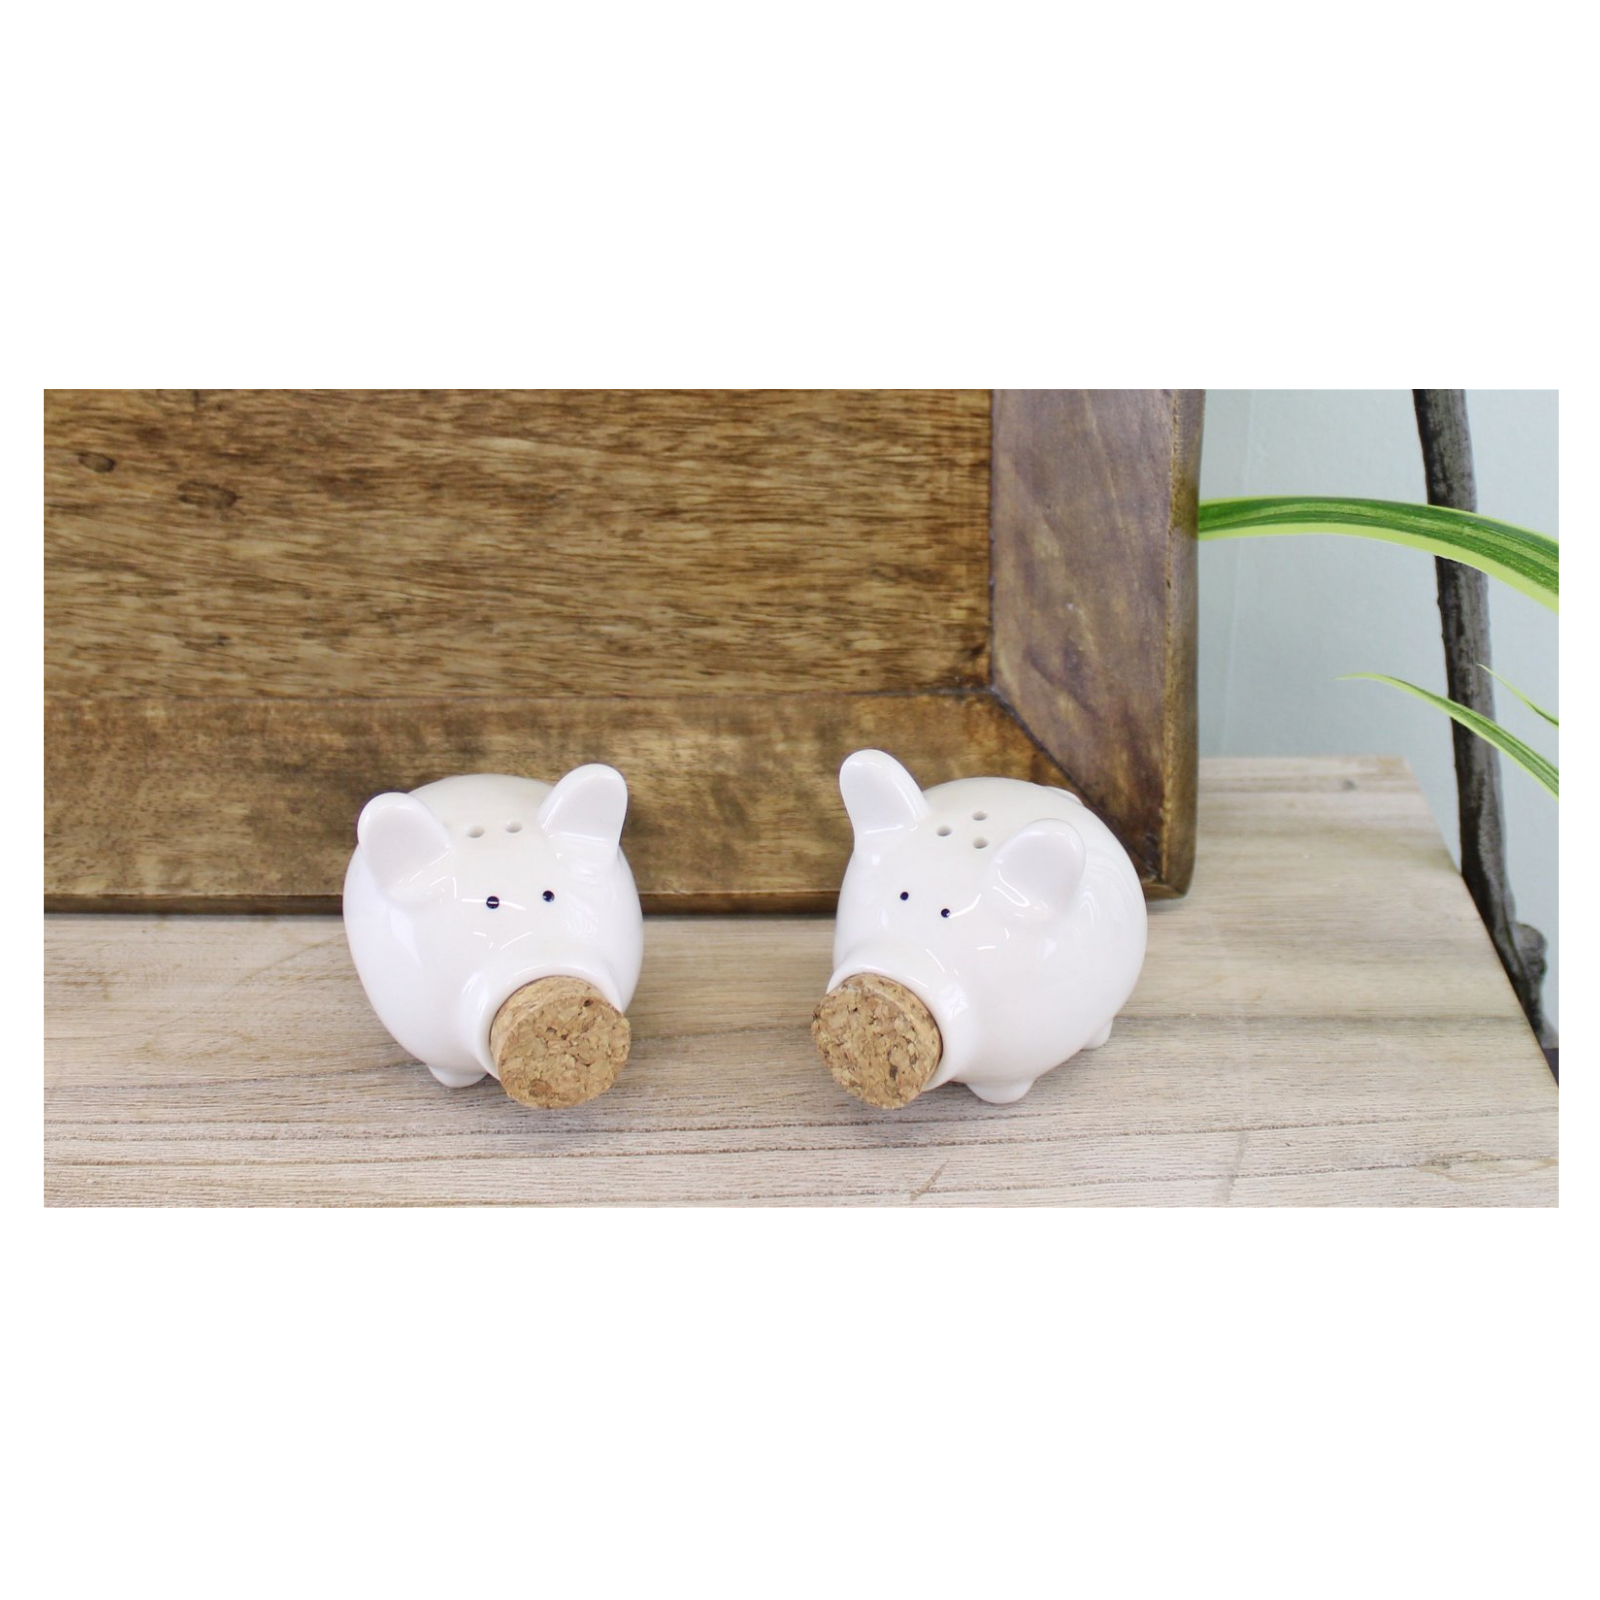 Salt & Pepper Condiment Set, Pigs with Cork Stoppers